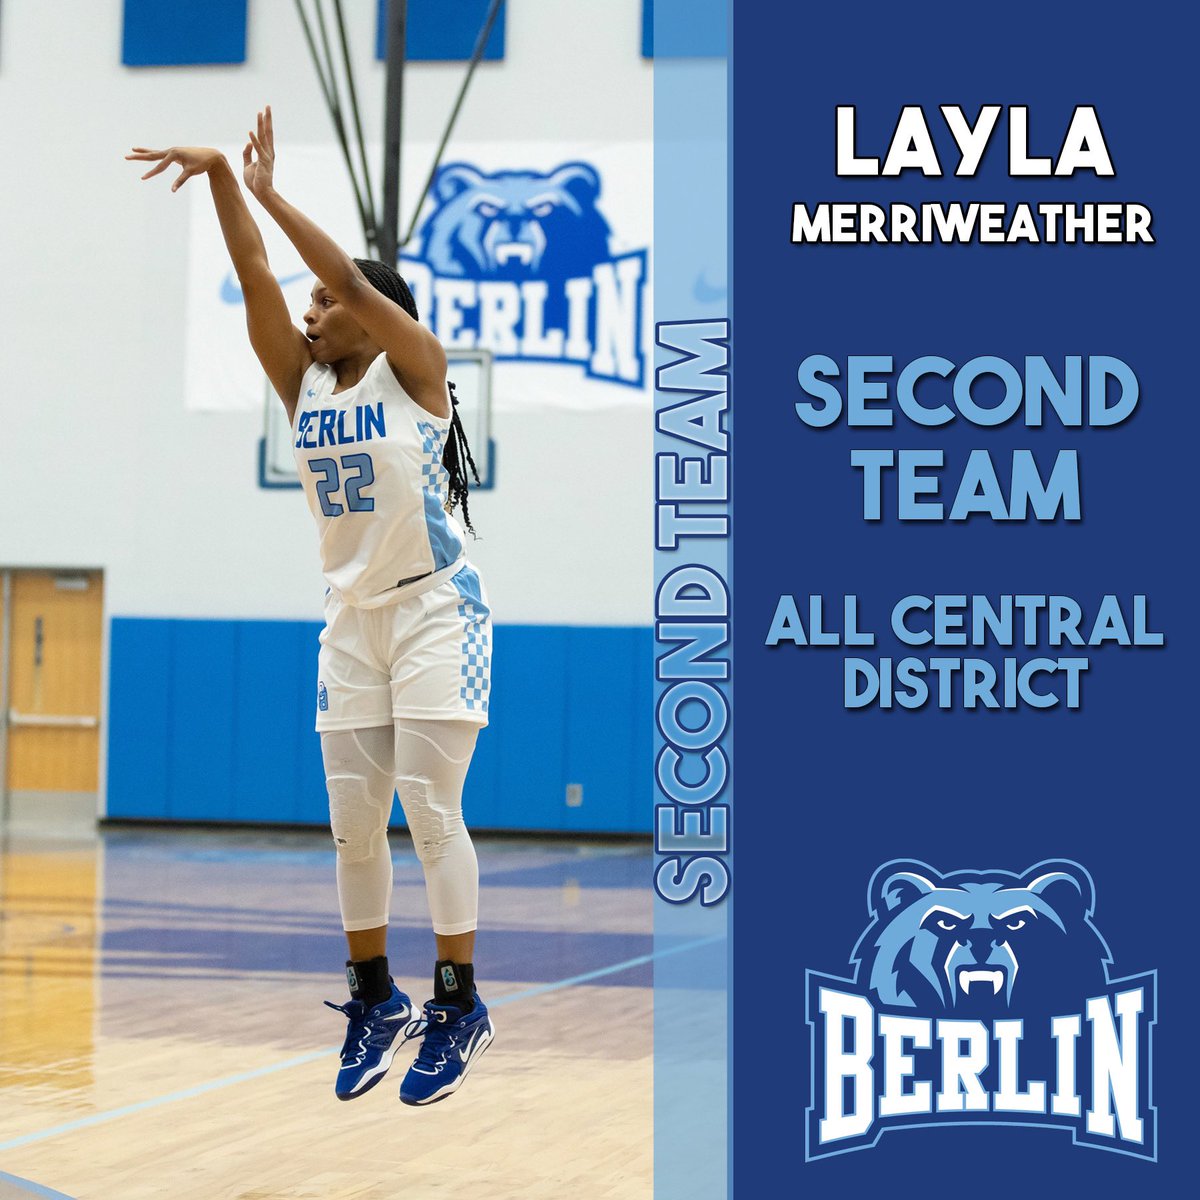 Congratulations @LMerriweather22 for making the All Central District Div. 1 2nd team! Very deserving and all of @ladybearsbbk is proud of you! @Todd_spinner @OBHSBoosters #HardWorkPaysOff #ClawsUp #TEAM